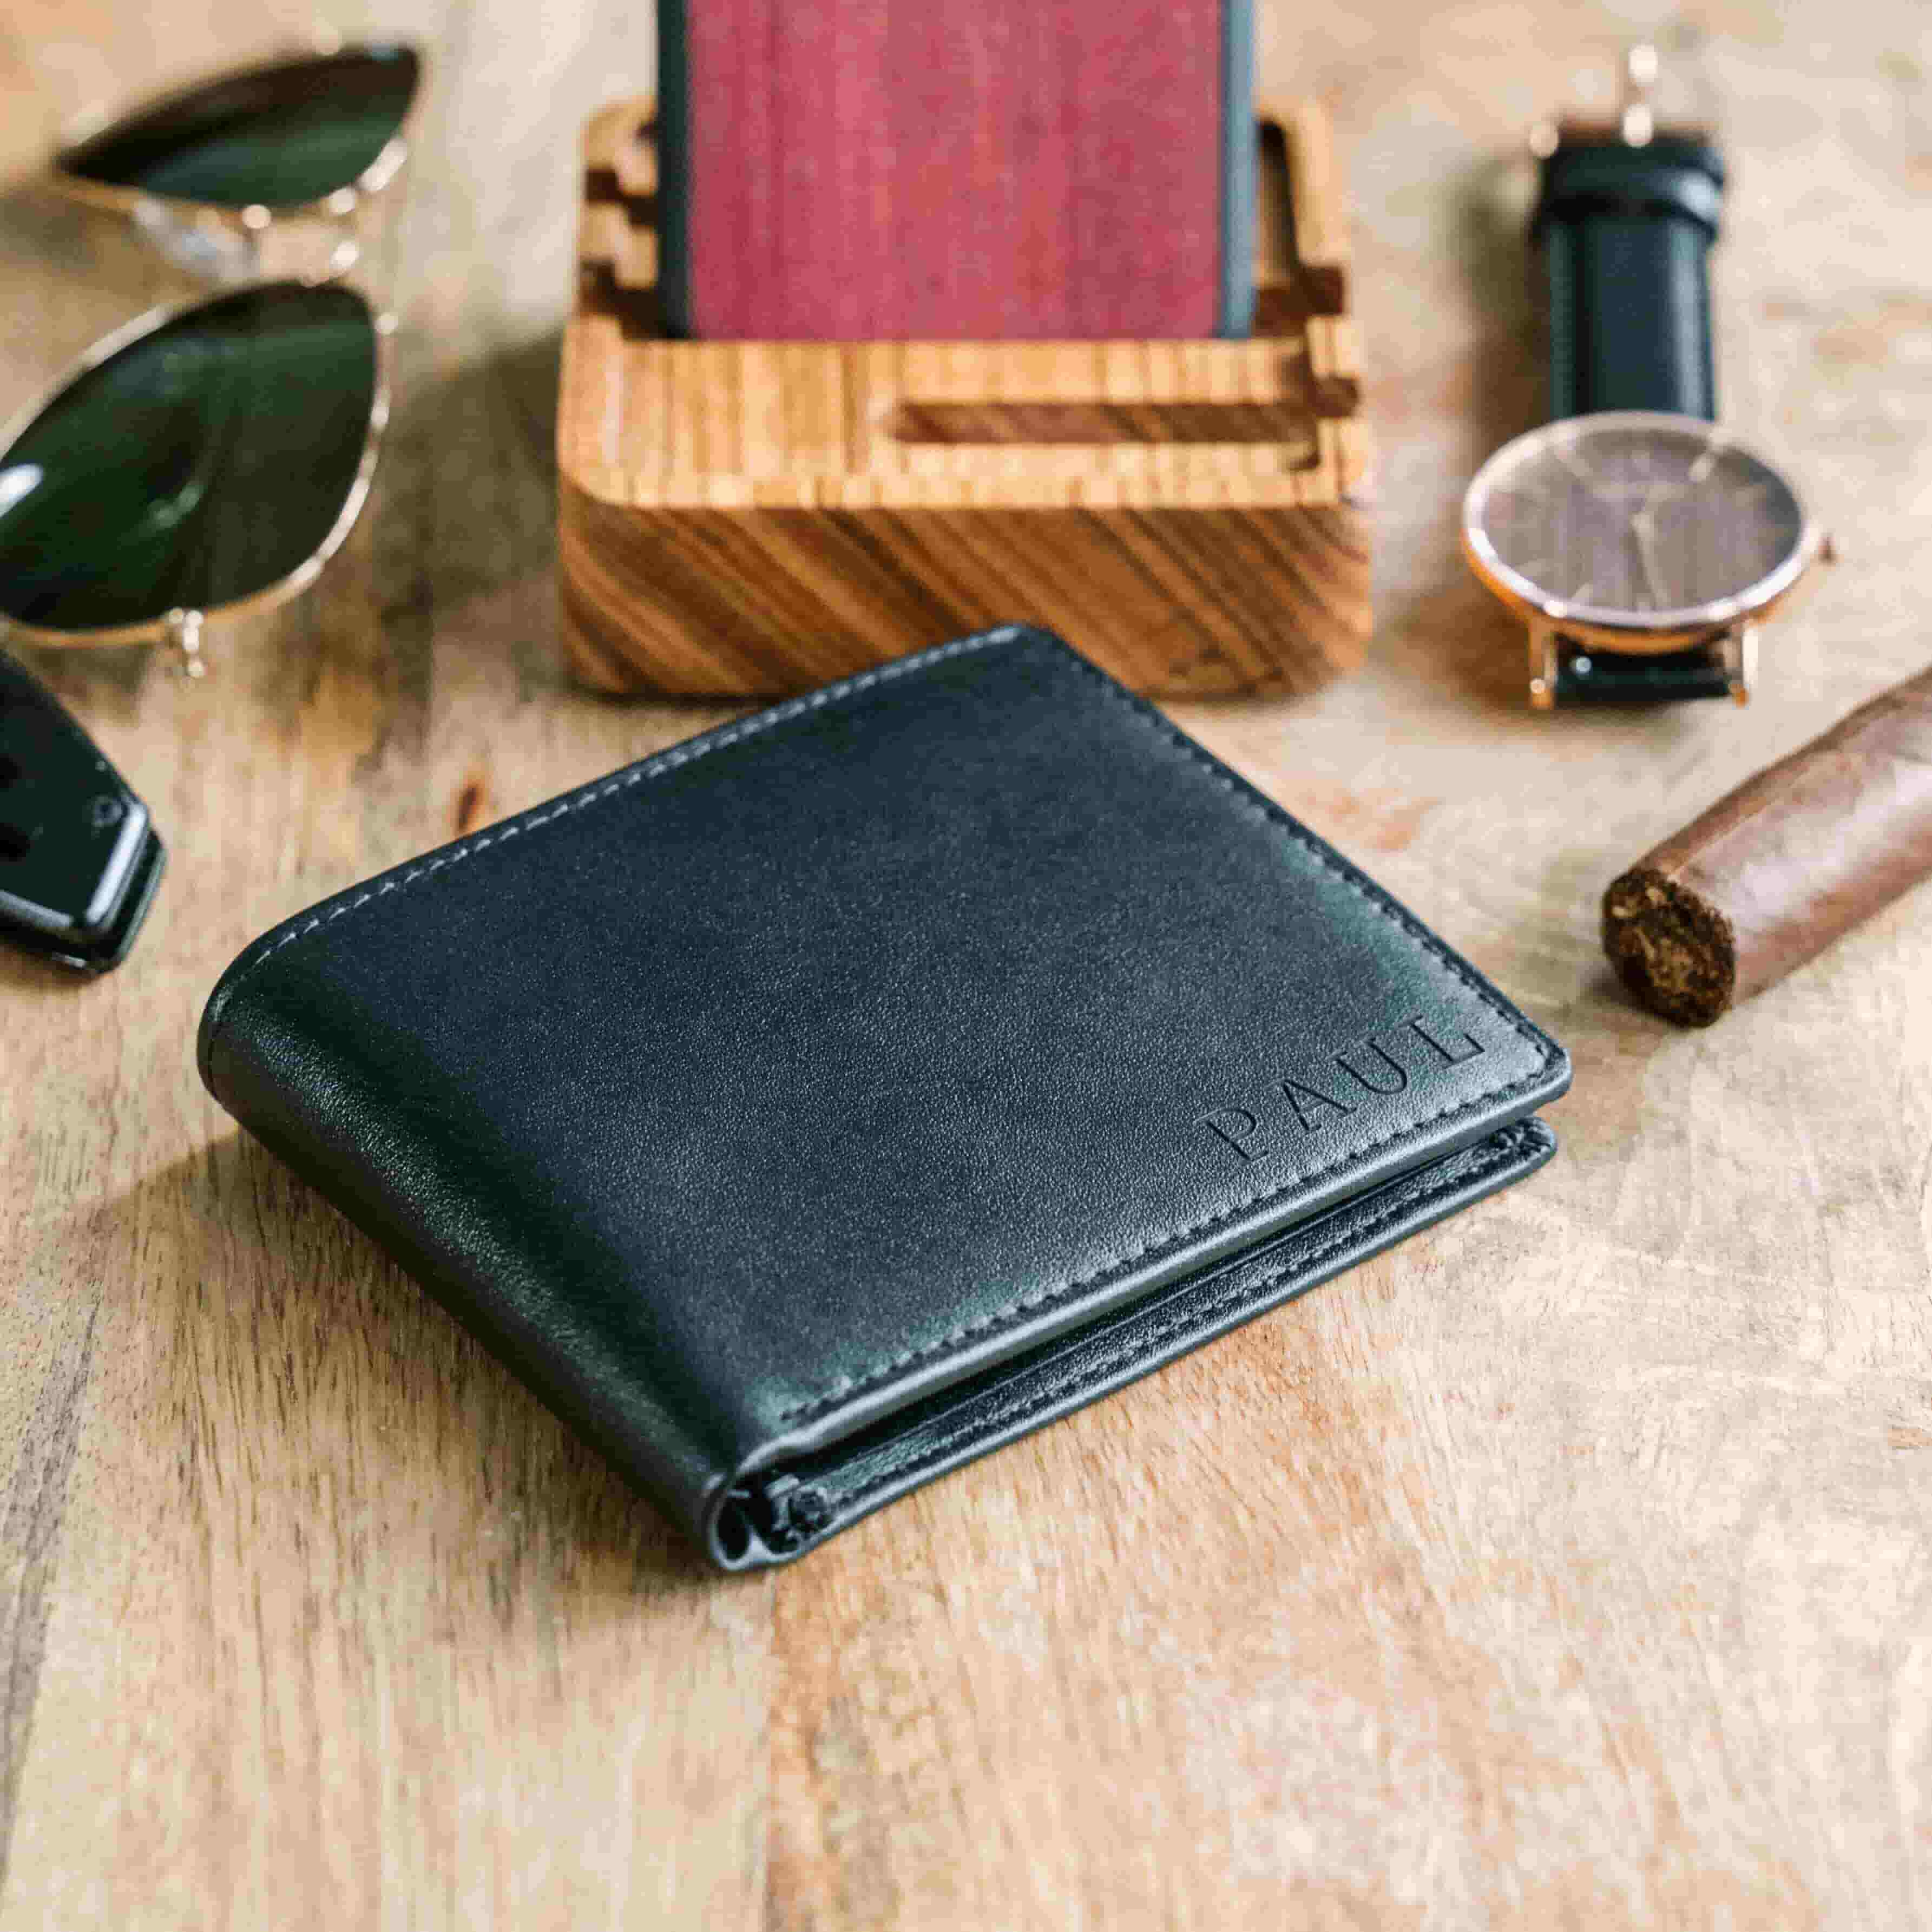 19 Classy Retirement Gifts for Dad